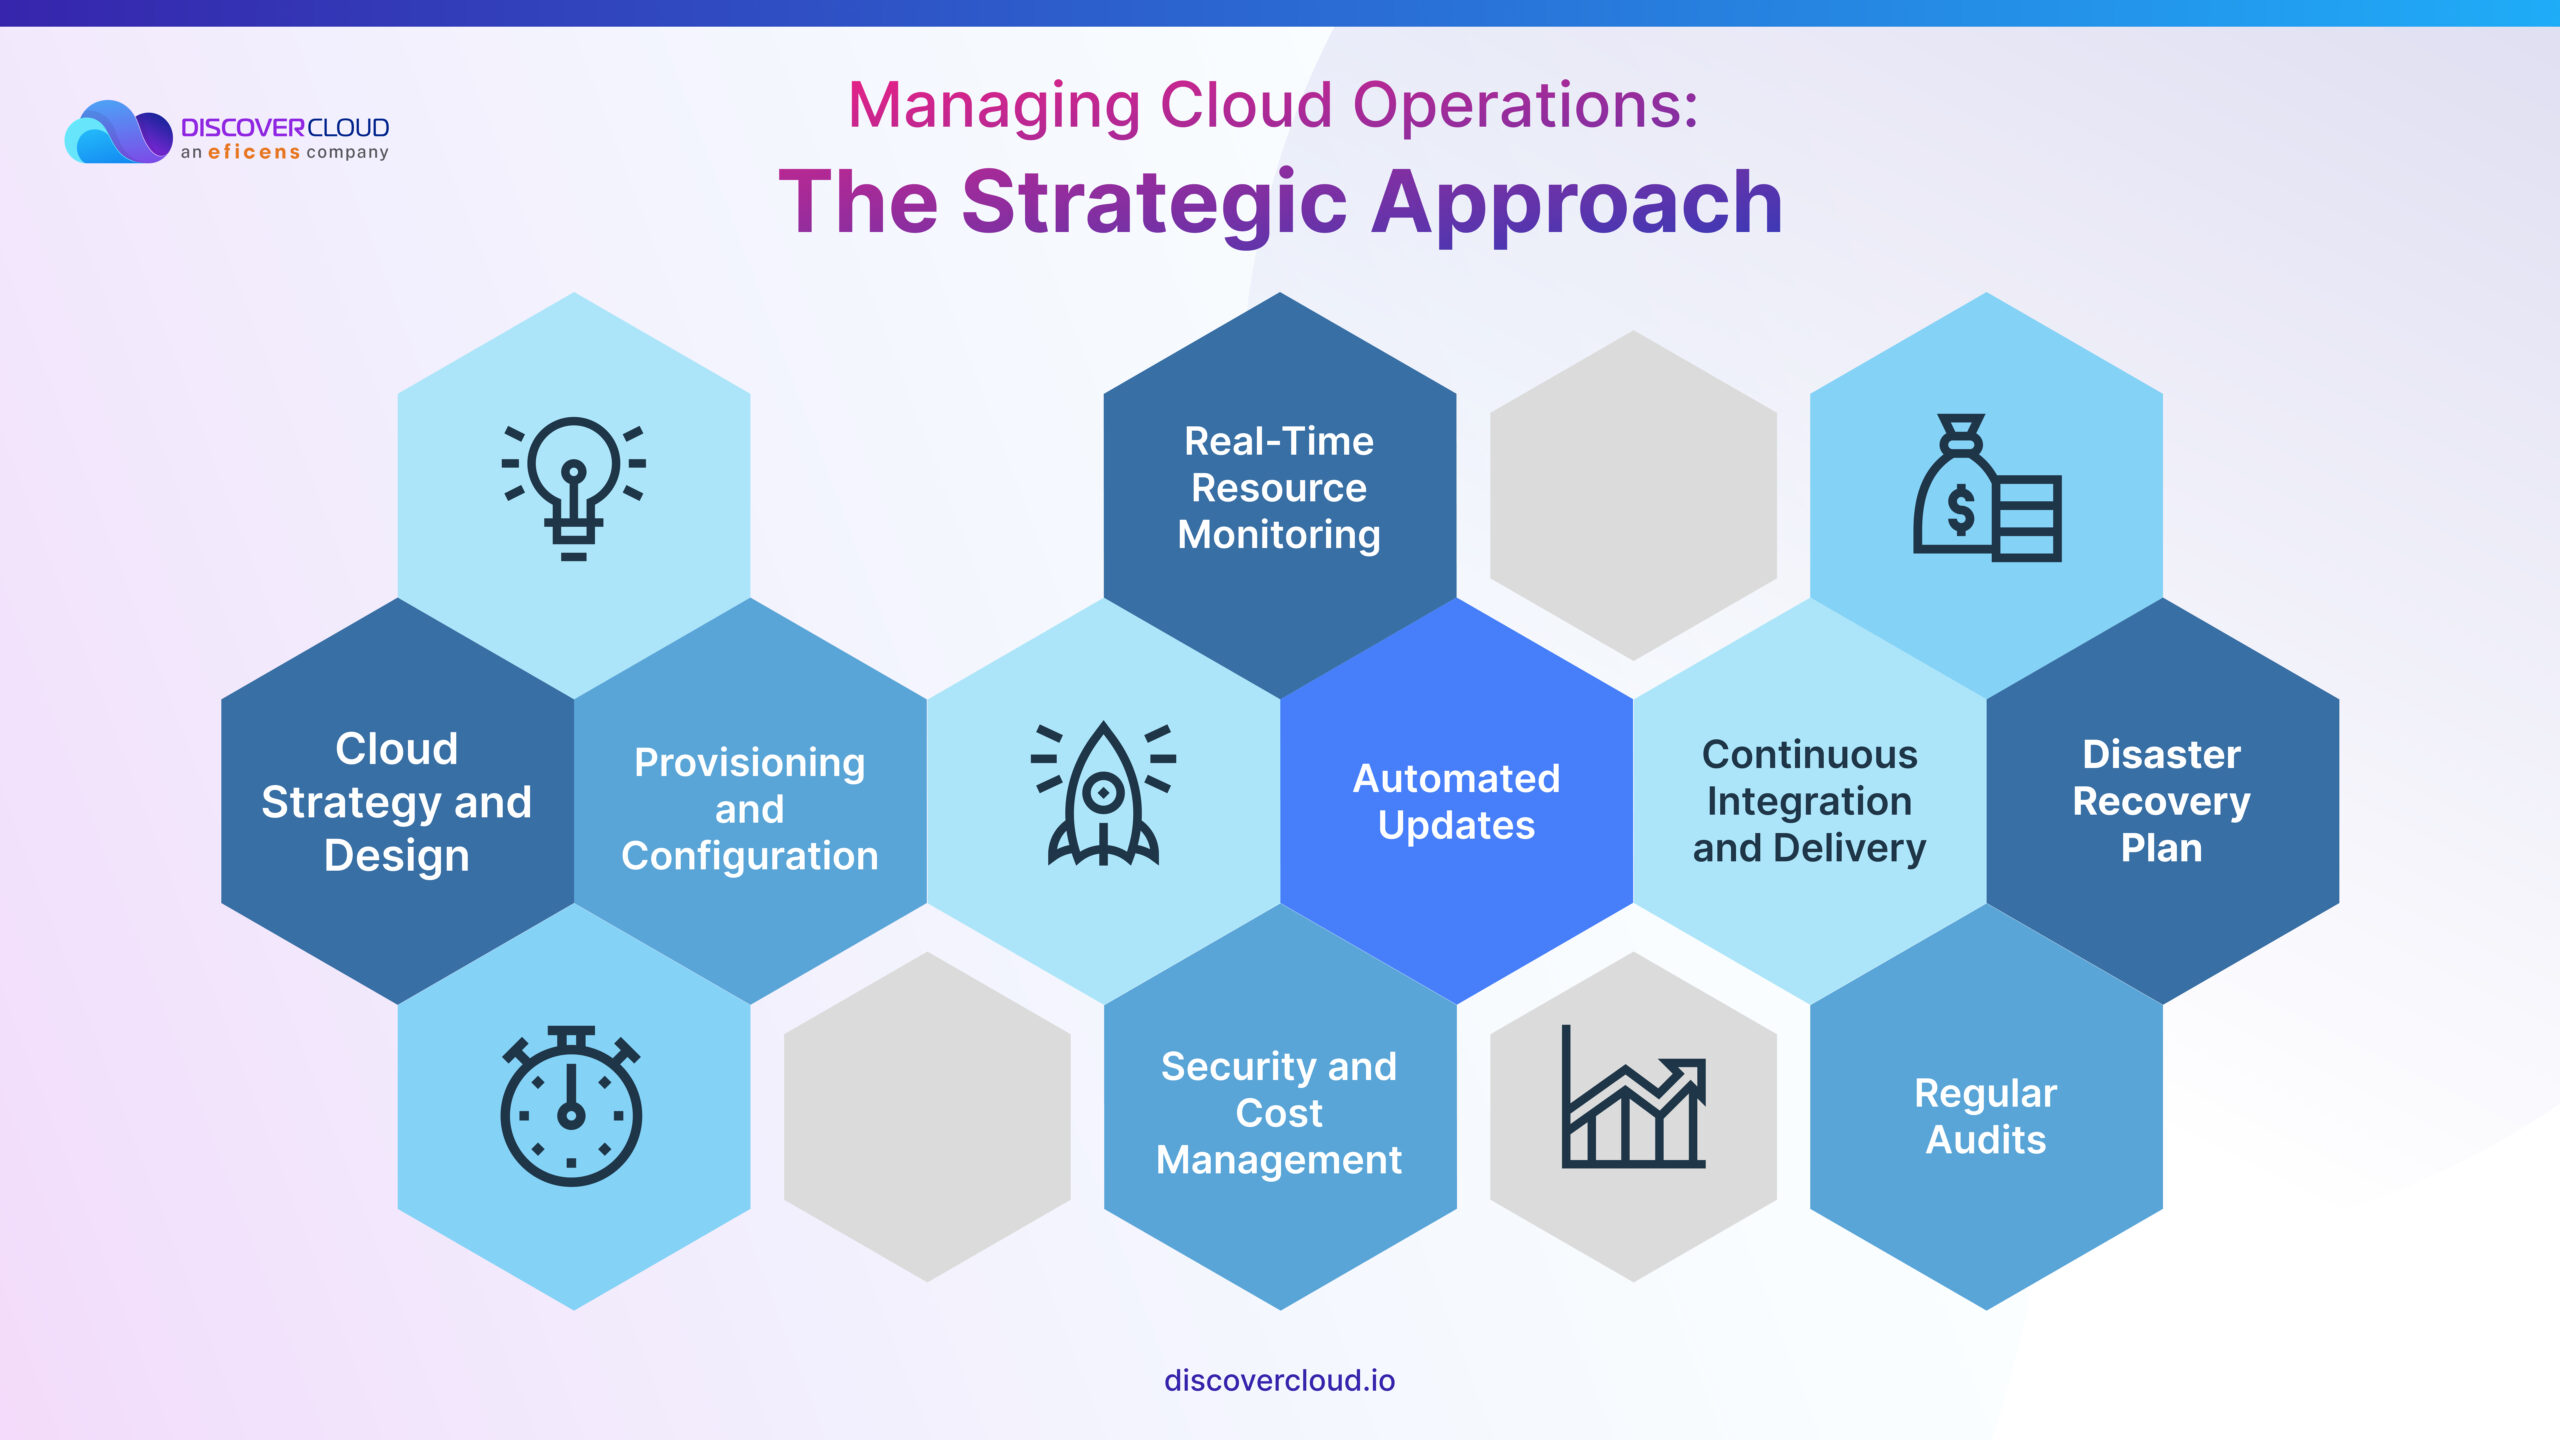 Managing Cloud Operations: The Strategic Approach